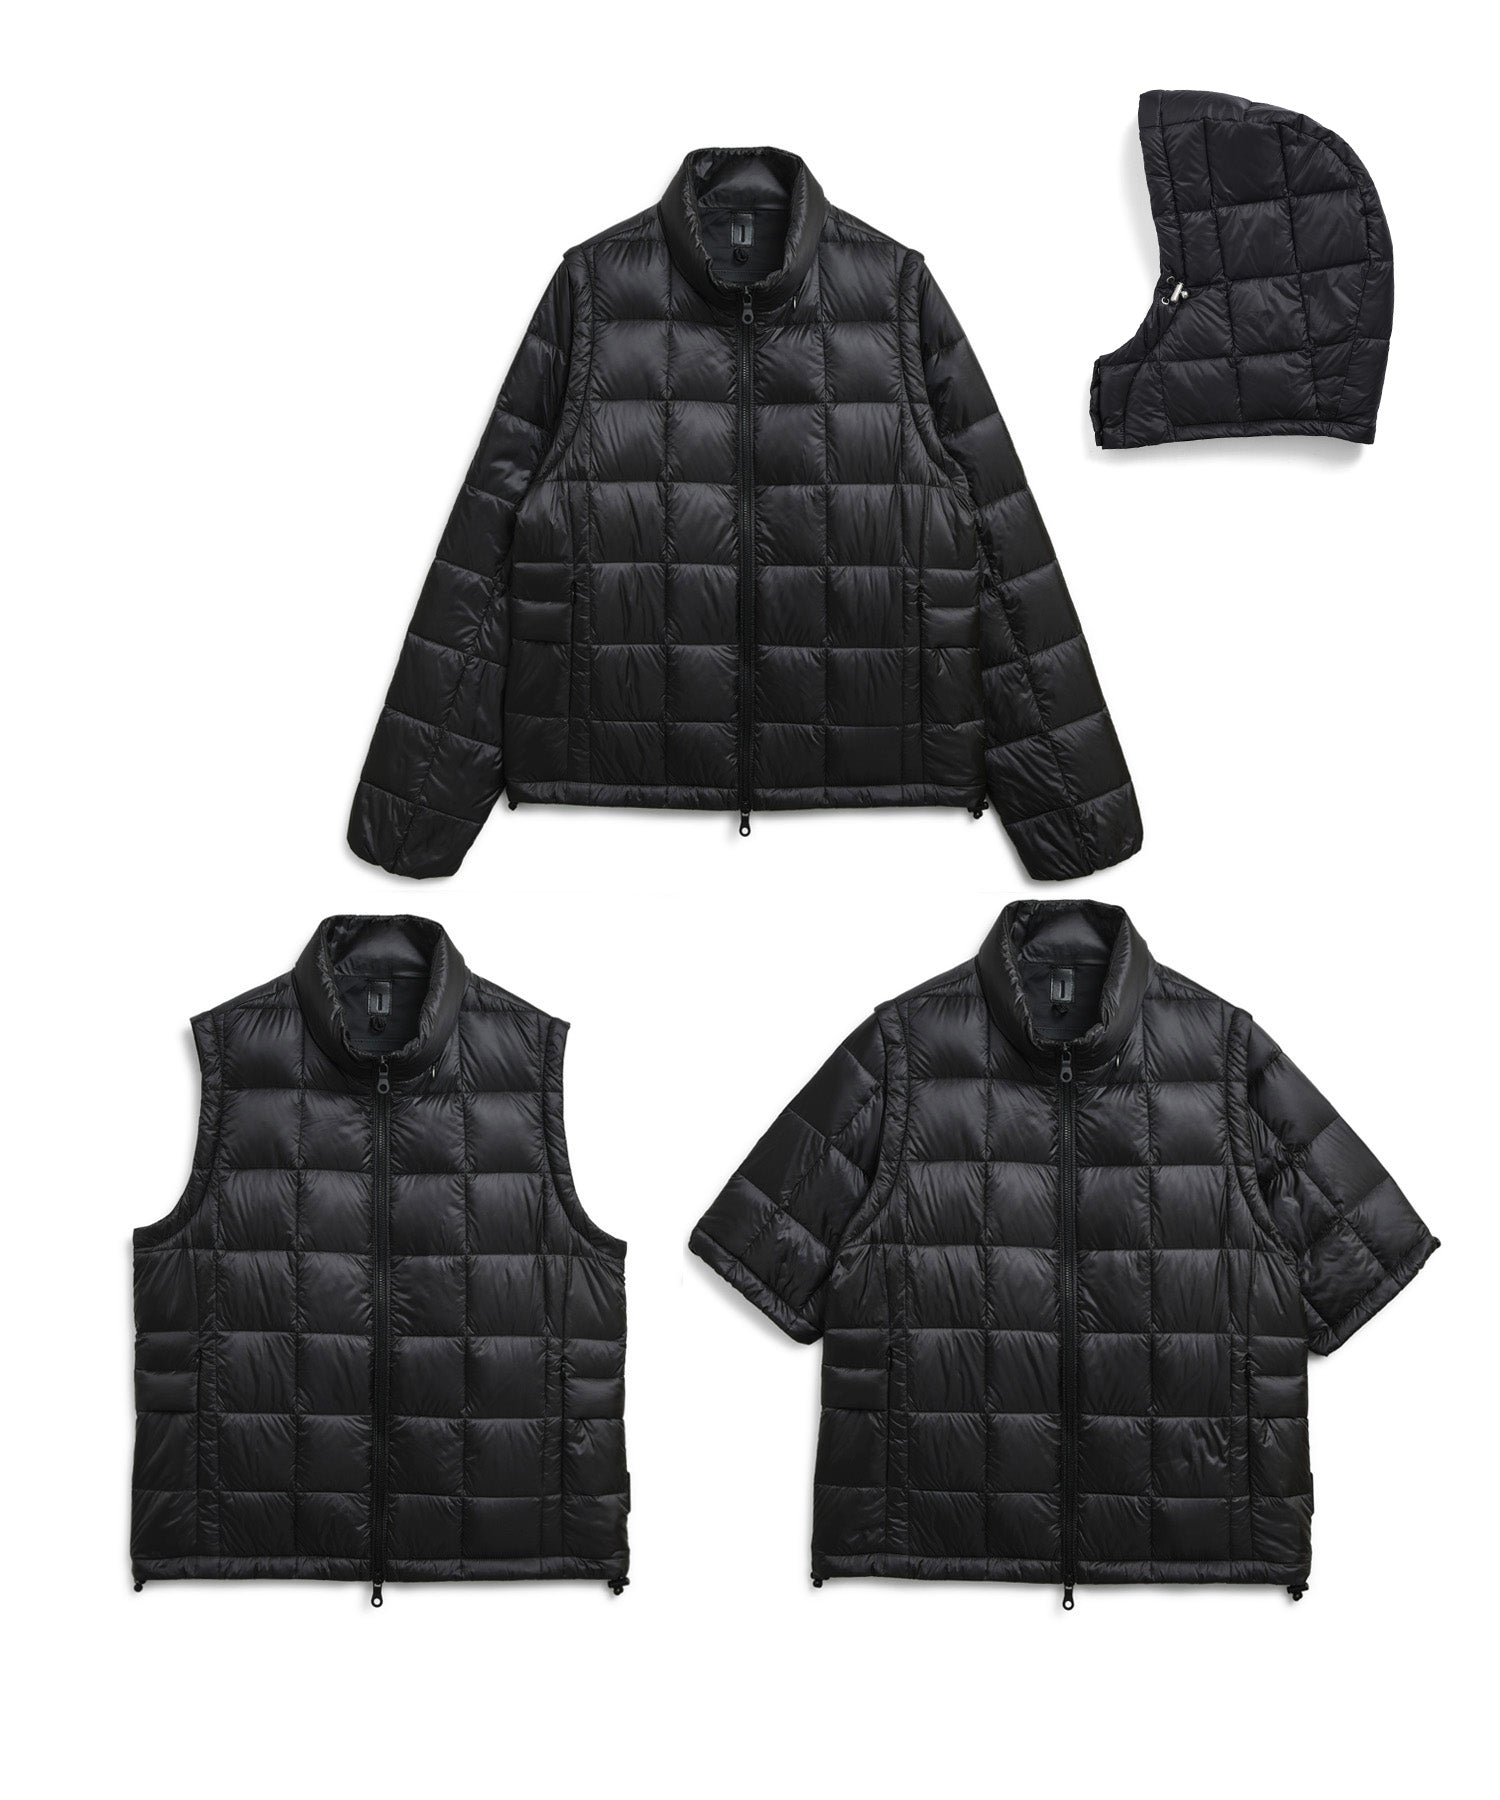 ALL PRODUCTS – – TAION EXTRA UTILITY PERFORMANCE WEAR-公式通販サイト